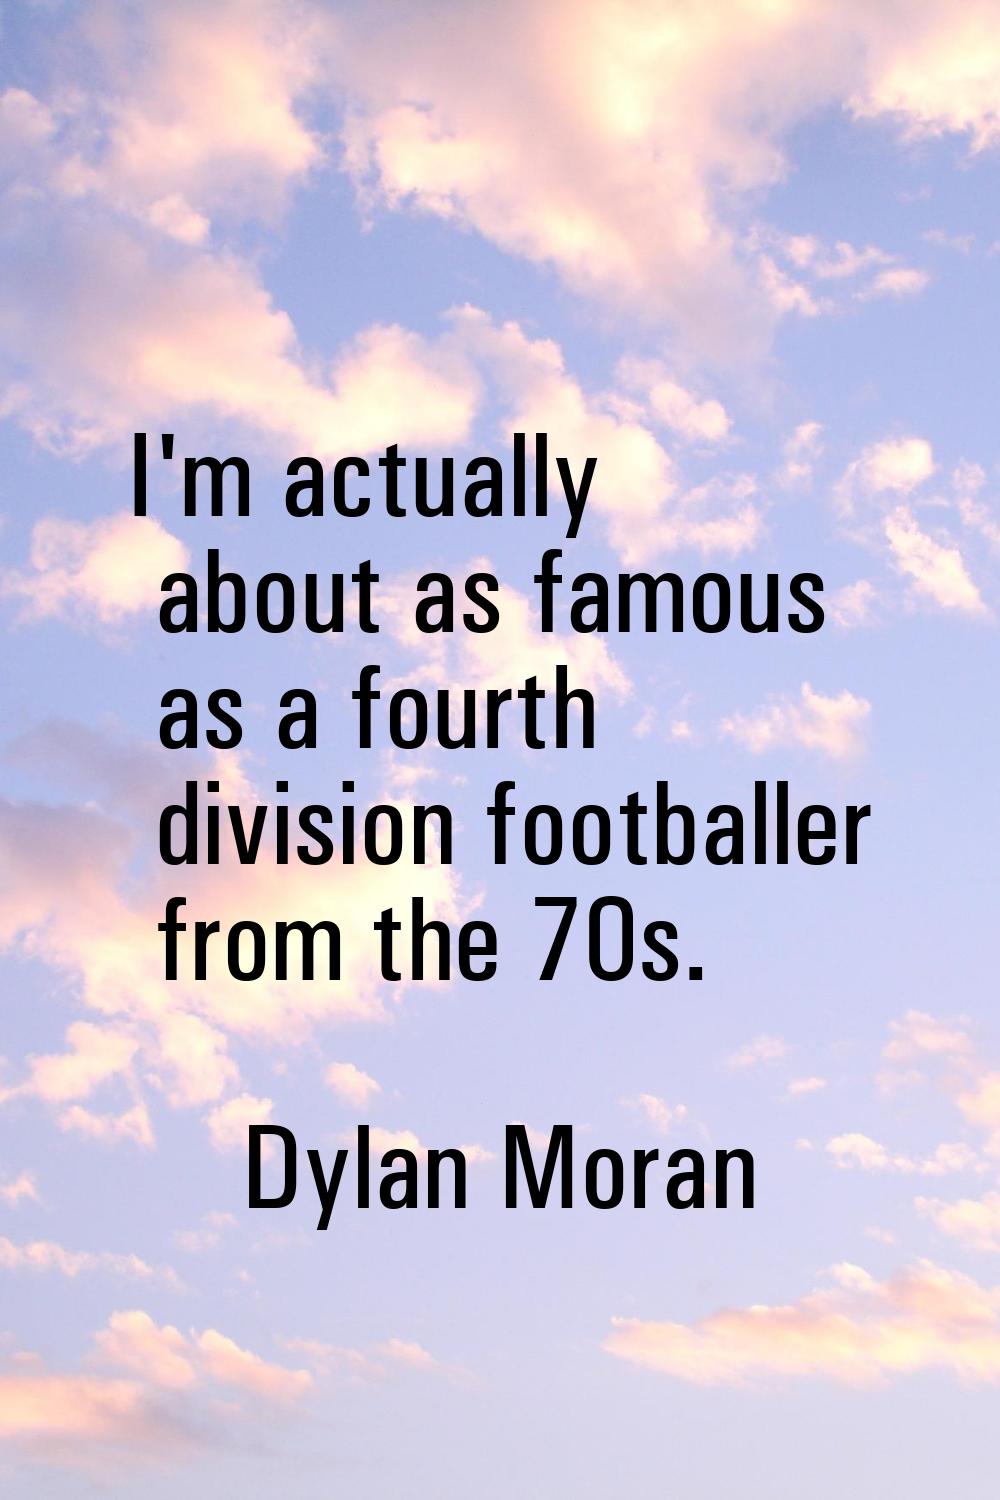 I'm actually about as famous as a fourth division footballer from the 70s.